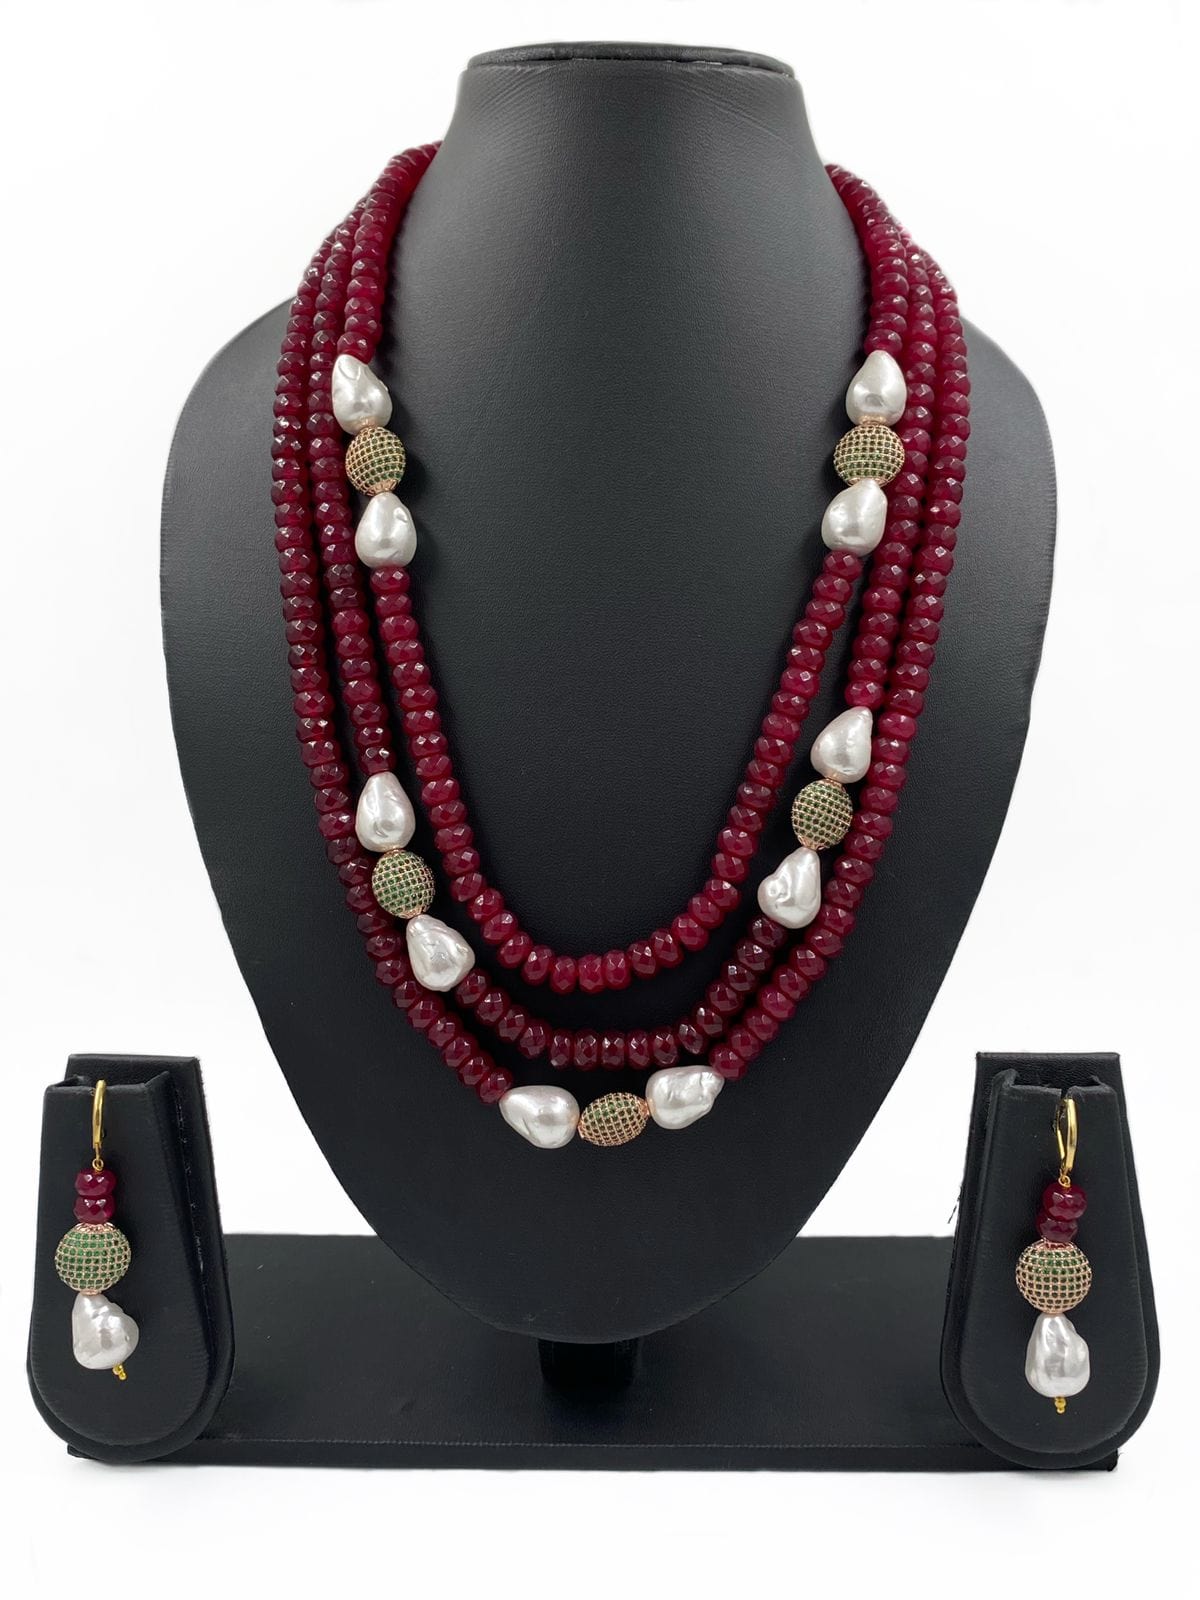 Designer Look Fancy Red Jade And Pearl Layered Beads Necklace For Women Beads Jewellery